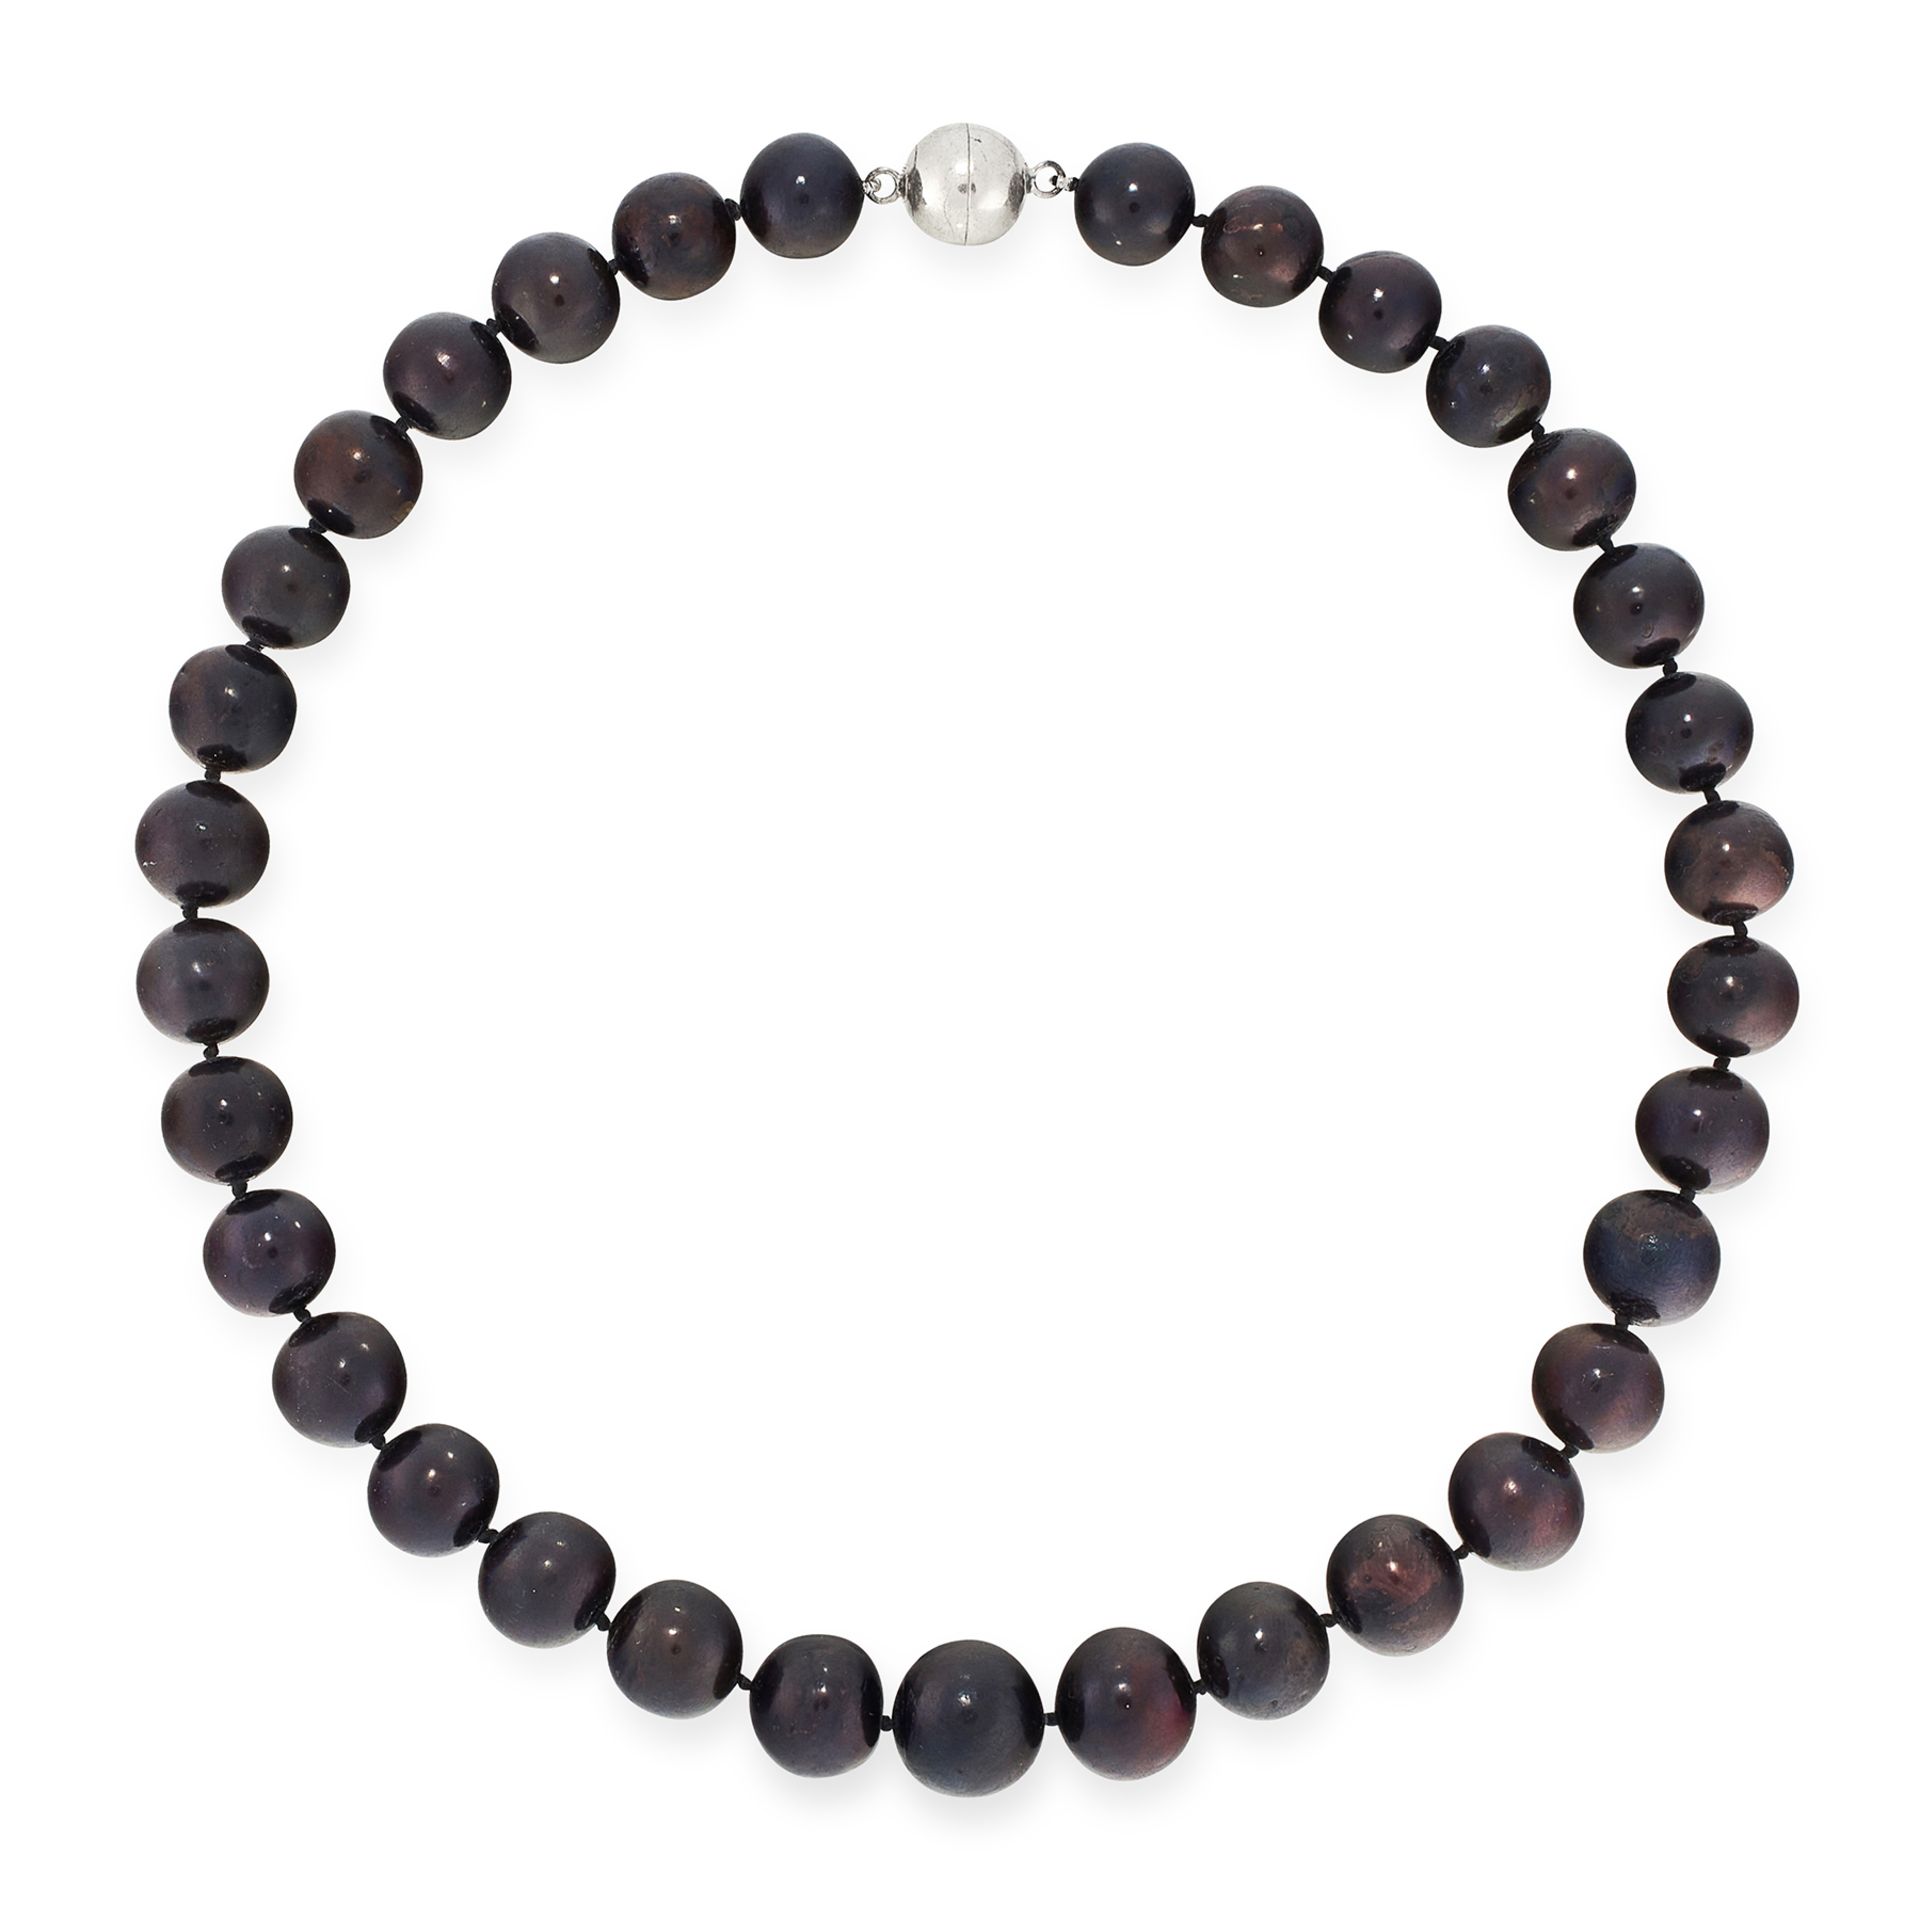 A BLACK PEARL BEAD NECKLACE comprising of a single row of black pearls ranging from 12.7mm-14.8mm,